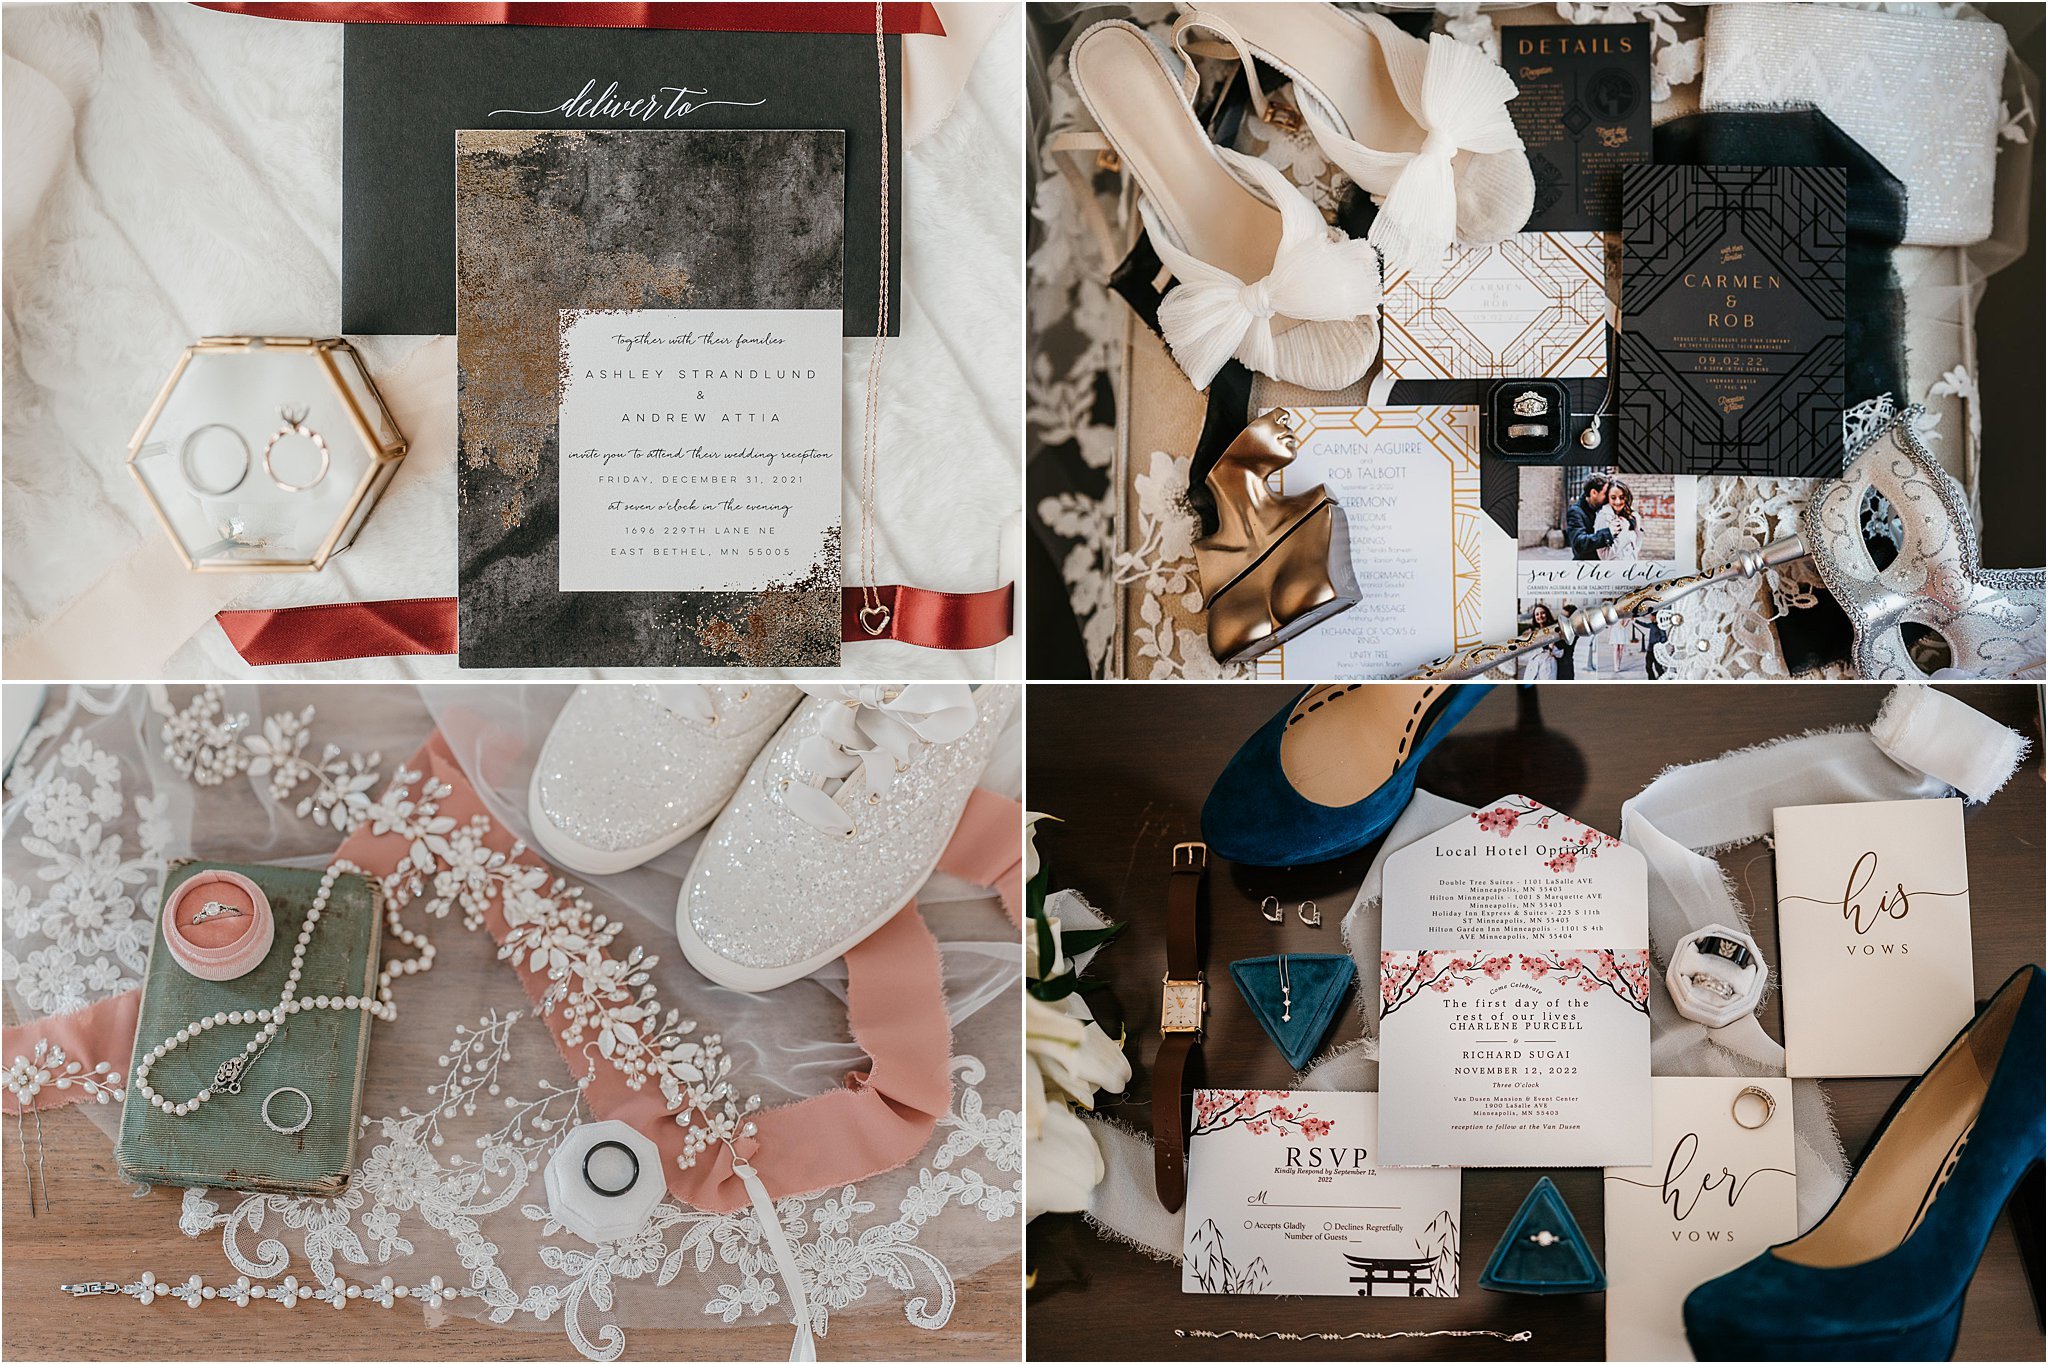 series of wedding day details